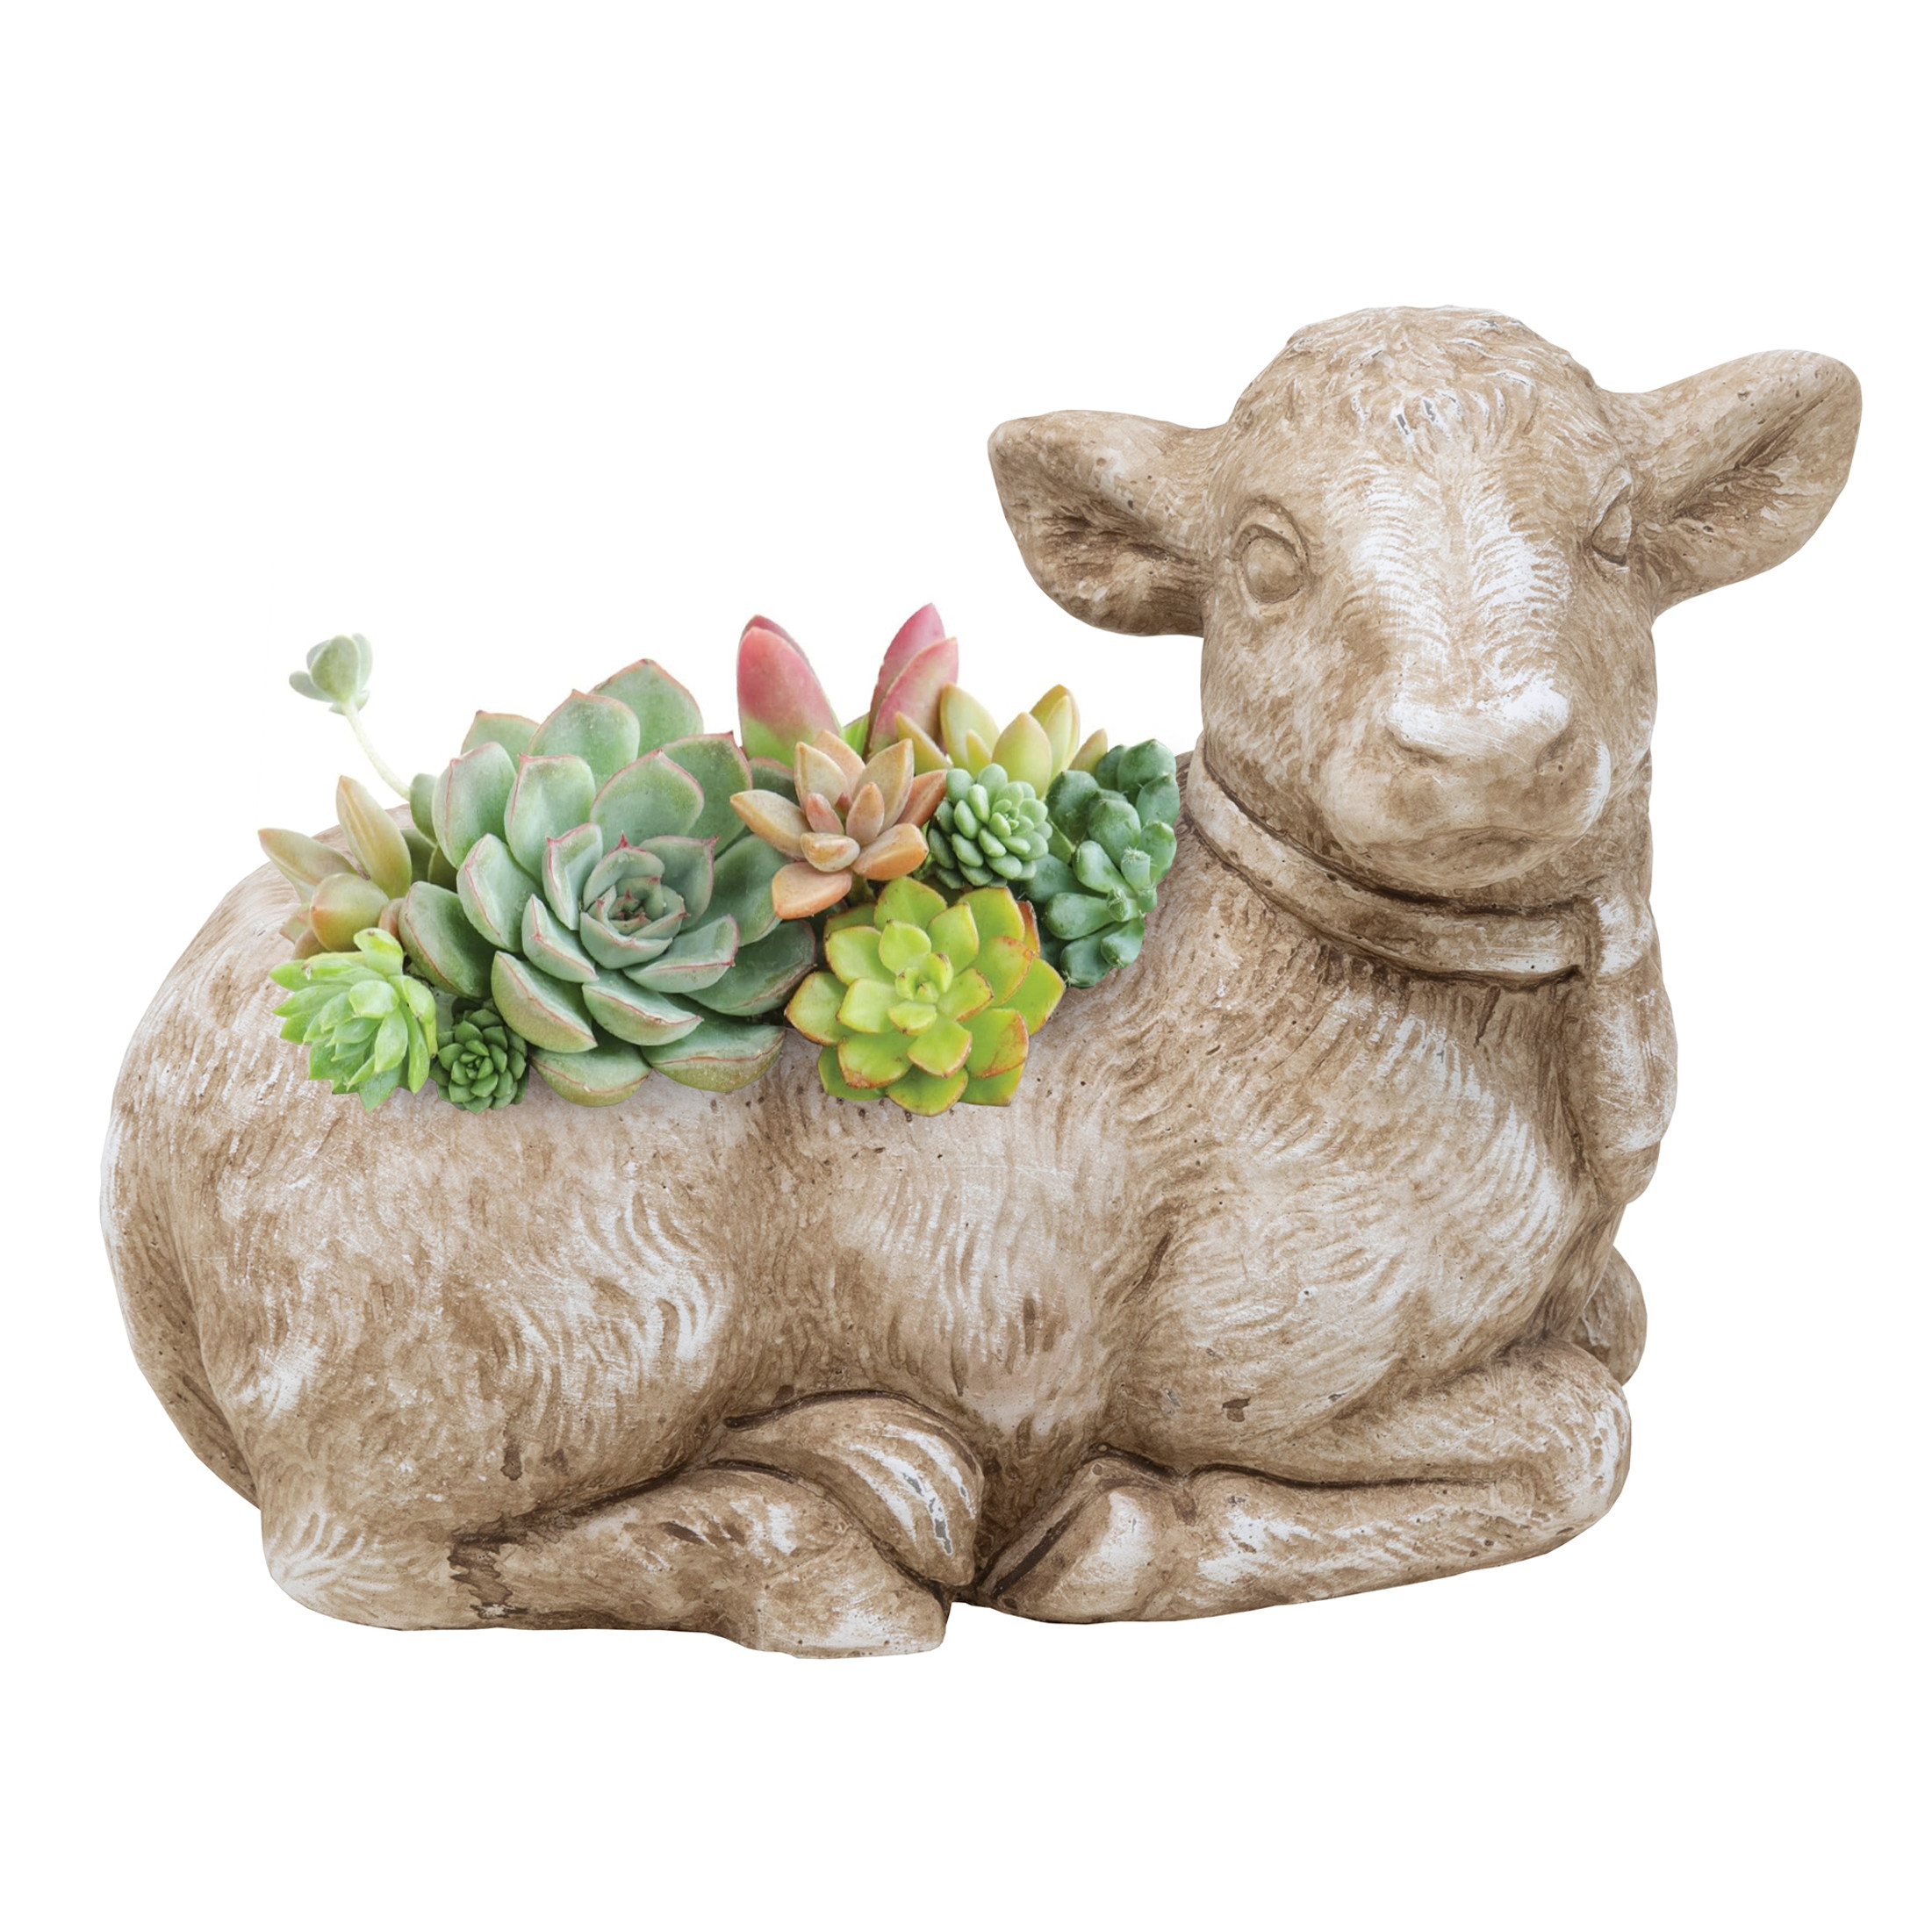 Classic Home and Garden Cement Buddies Indoor Outdoor Cow Planter